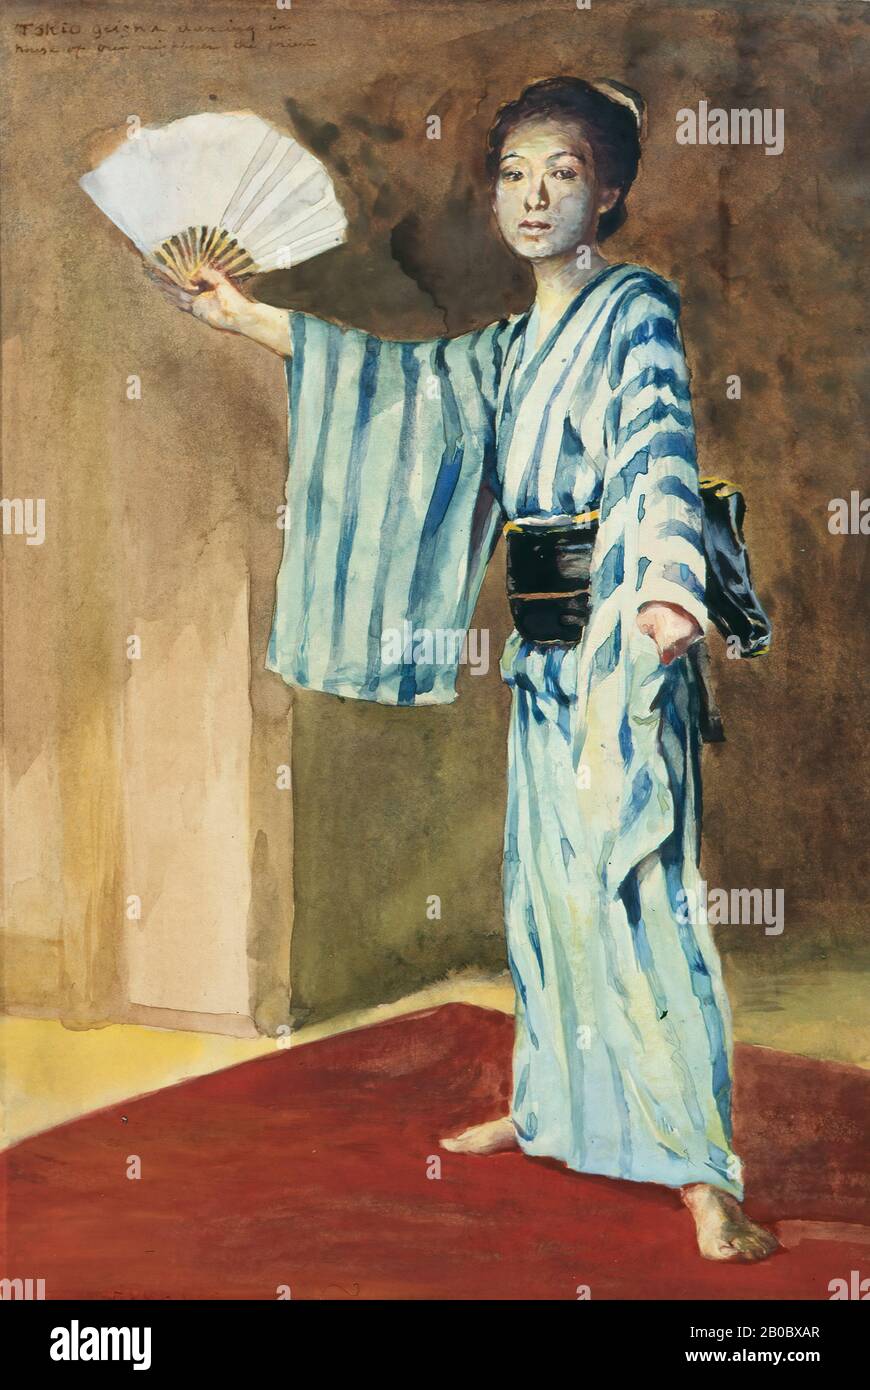 John La Farge, Tokio Geisha Dancing in the House of Our Neighbor, Nikko, 1886, gouache with traces of graphite on off-white wove paper, 15 9/16 in. x 10 11/16 in. (39.53 cm x 27.2 cm Stock Photo